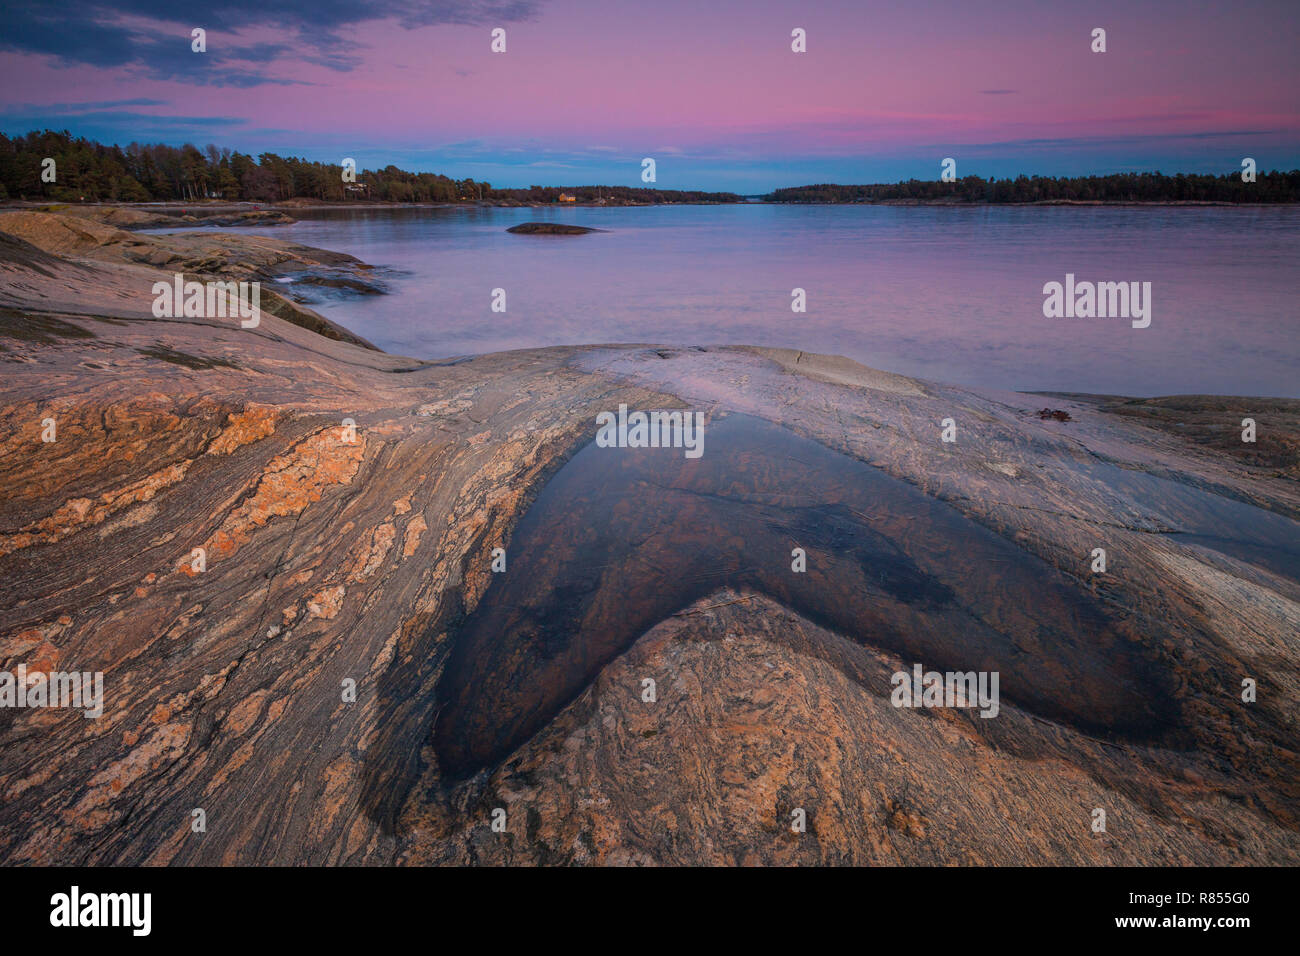 Beautiful winter evening landscape by the Oslofjord, at Oven in Østfold, Norway. The blue part on the sky is the shadow of the earth. Stock Photo